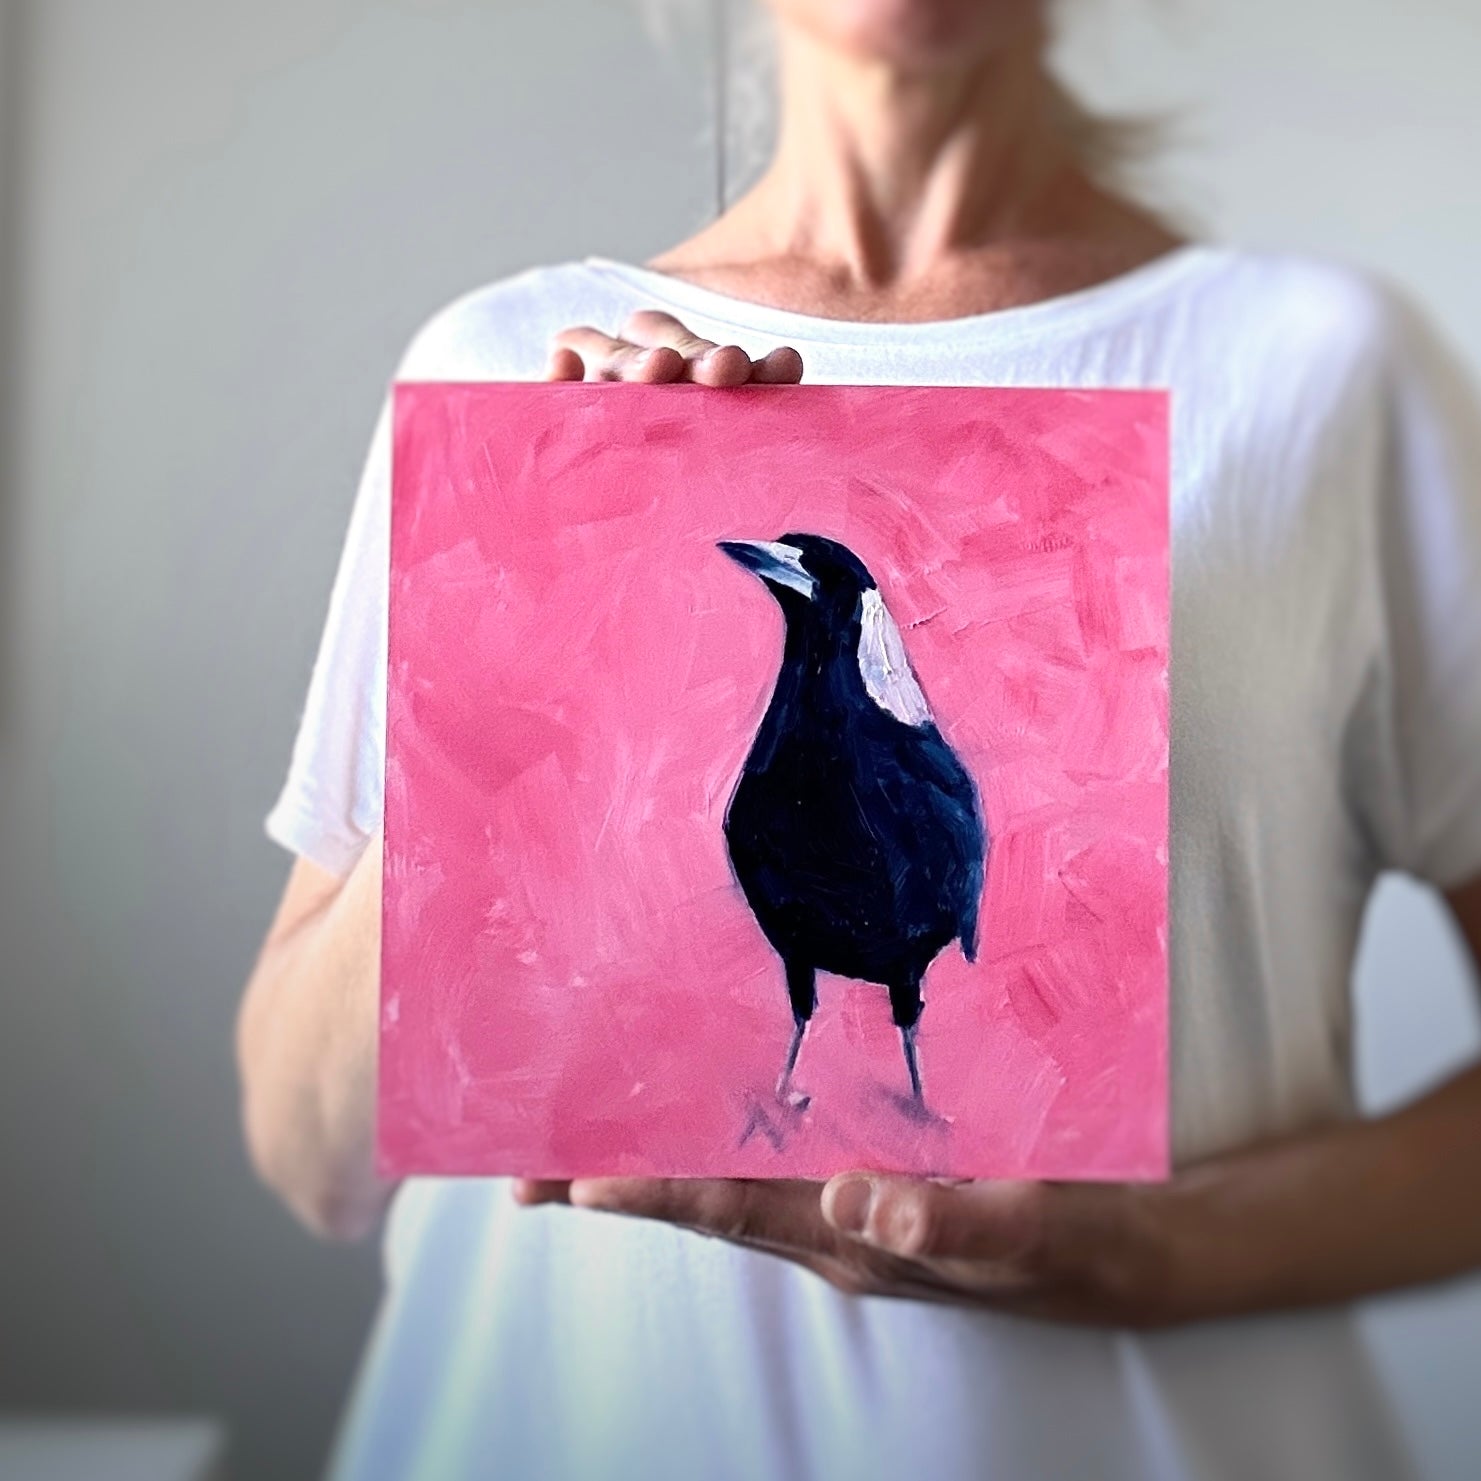 photo of a person holding a fine art original oil painting of a navy blue and white baby magpie on a textured pink background